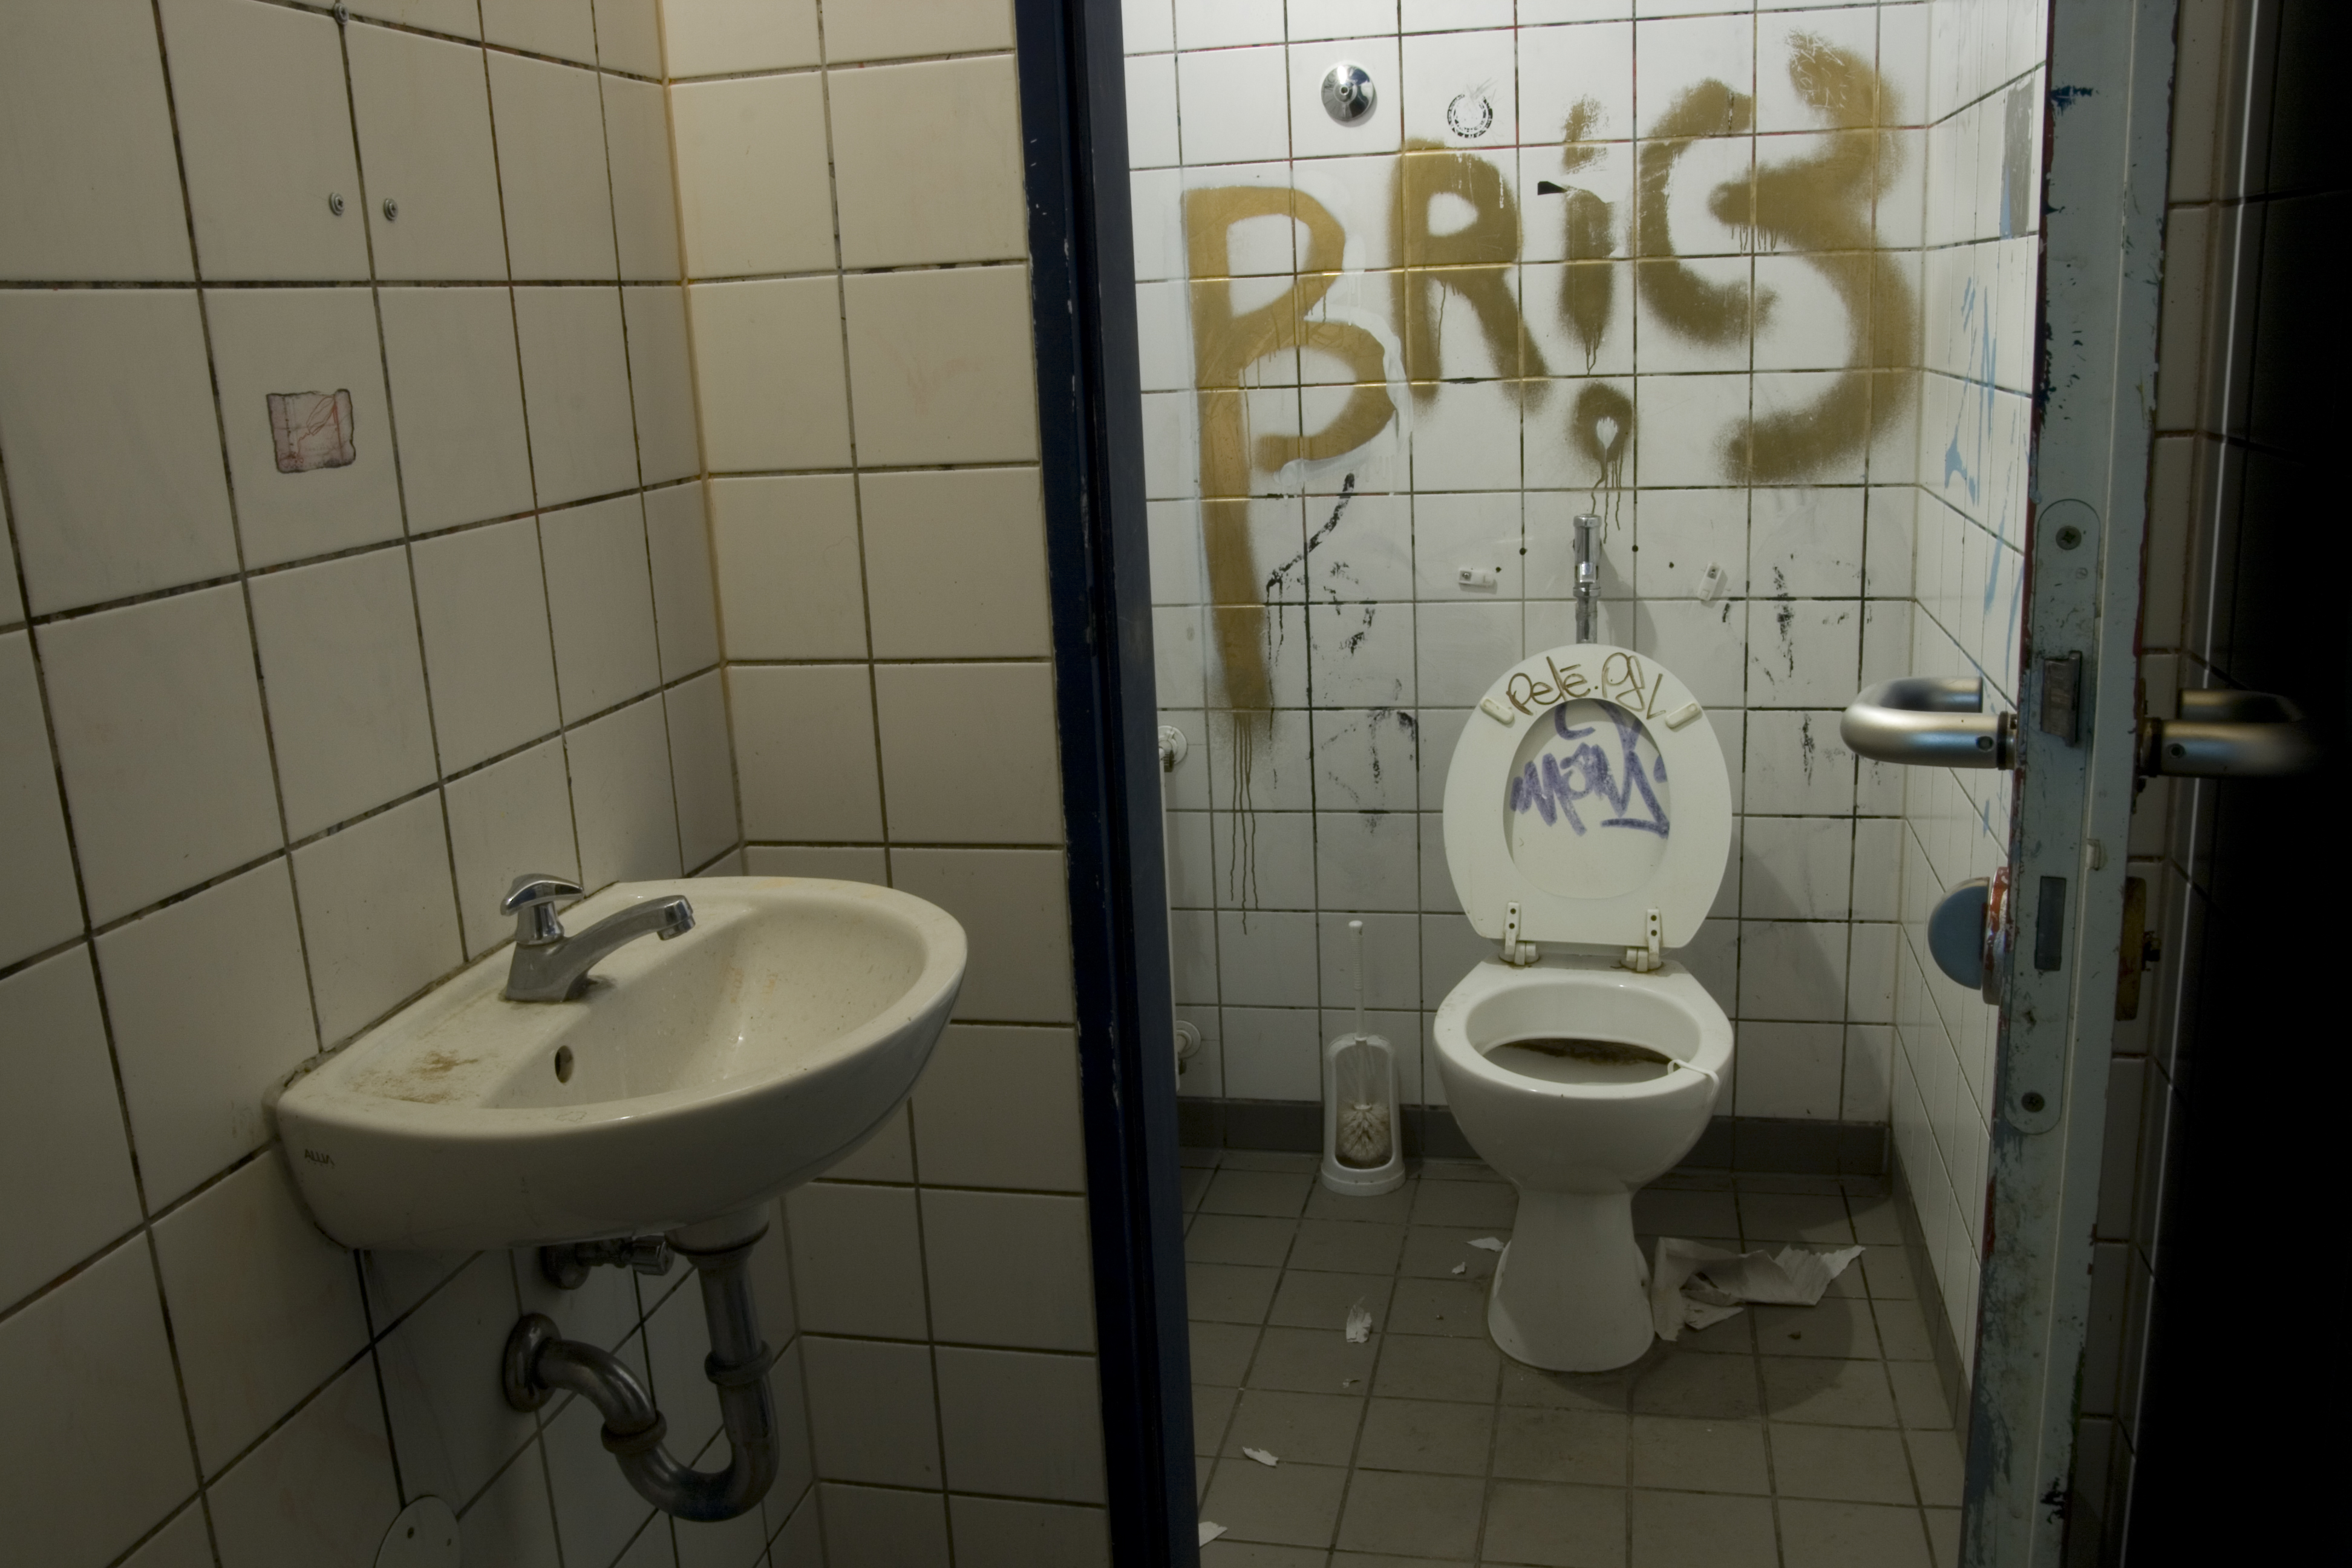 Whites Only' Graffiti in Texas School Bathroom Sparks Investigation